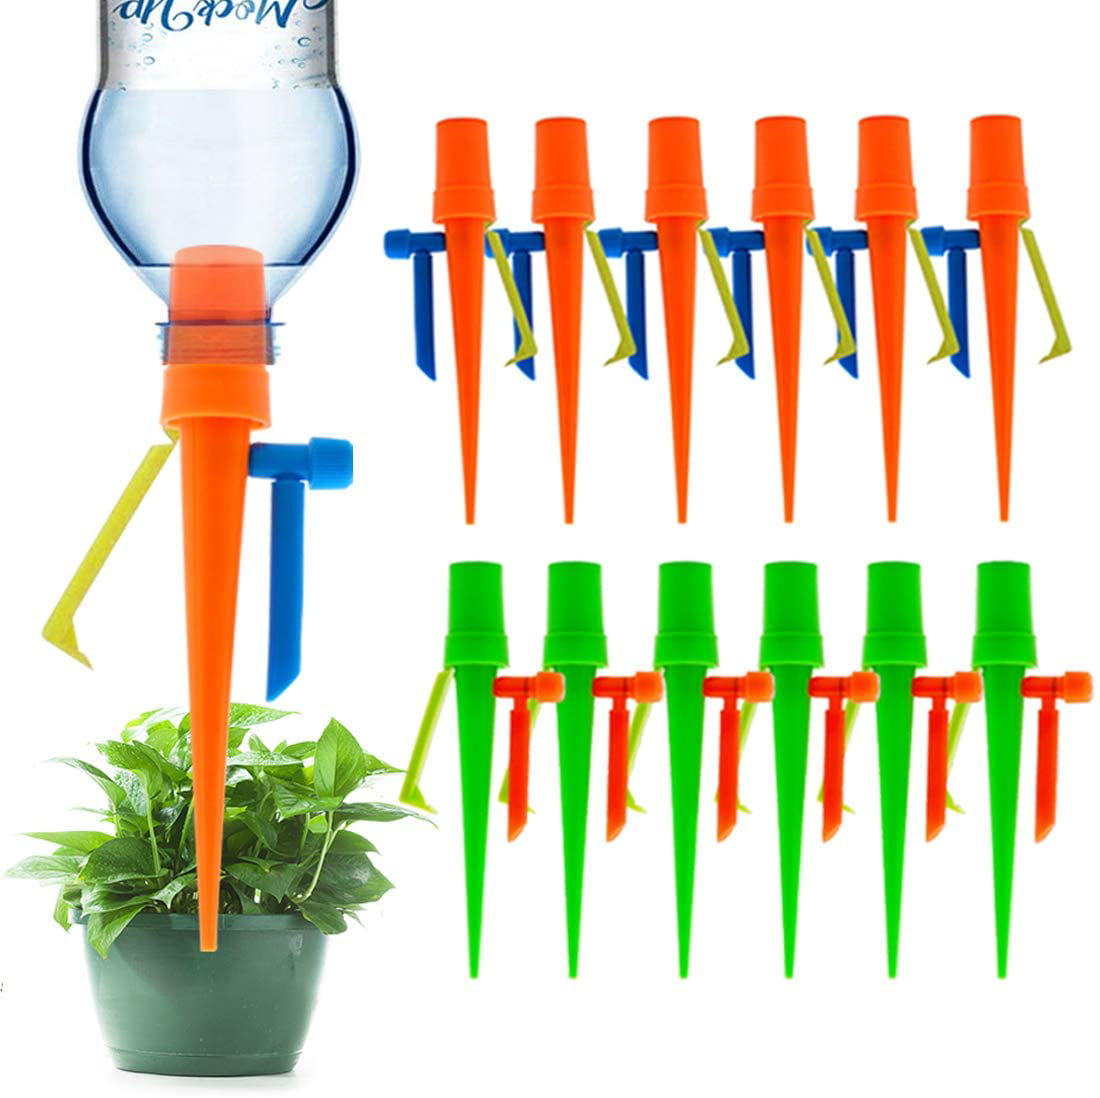 Automatic Watering Devices with Control Valve Switch for Outdoor Indoor Plants 12Pcs Self Watering Spike Slow Release Vacation Plants Watering System FZM Plant Waterer